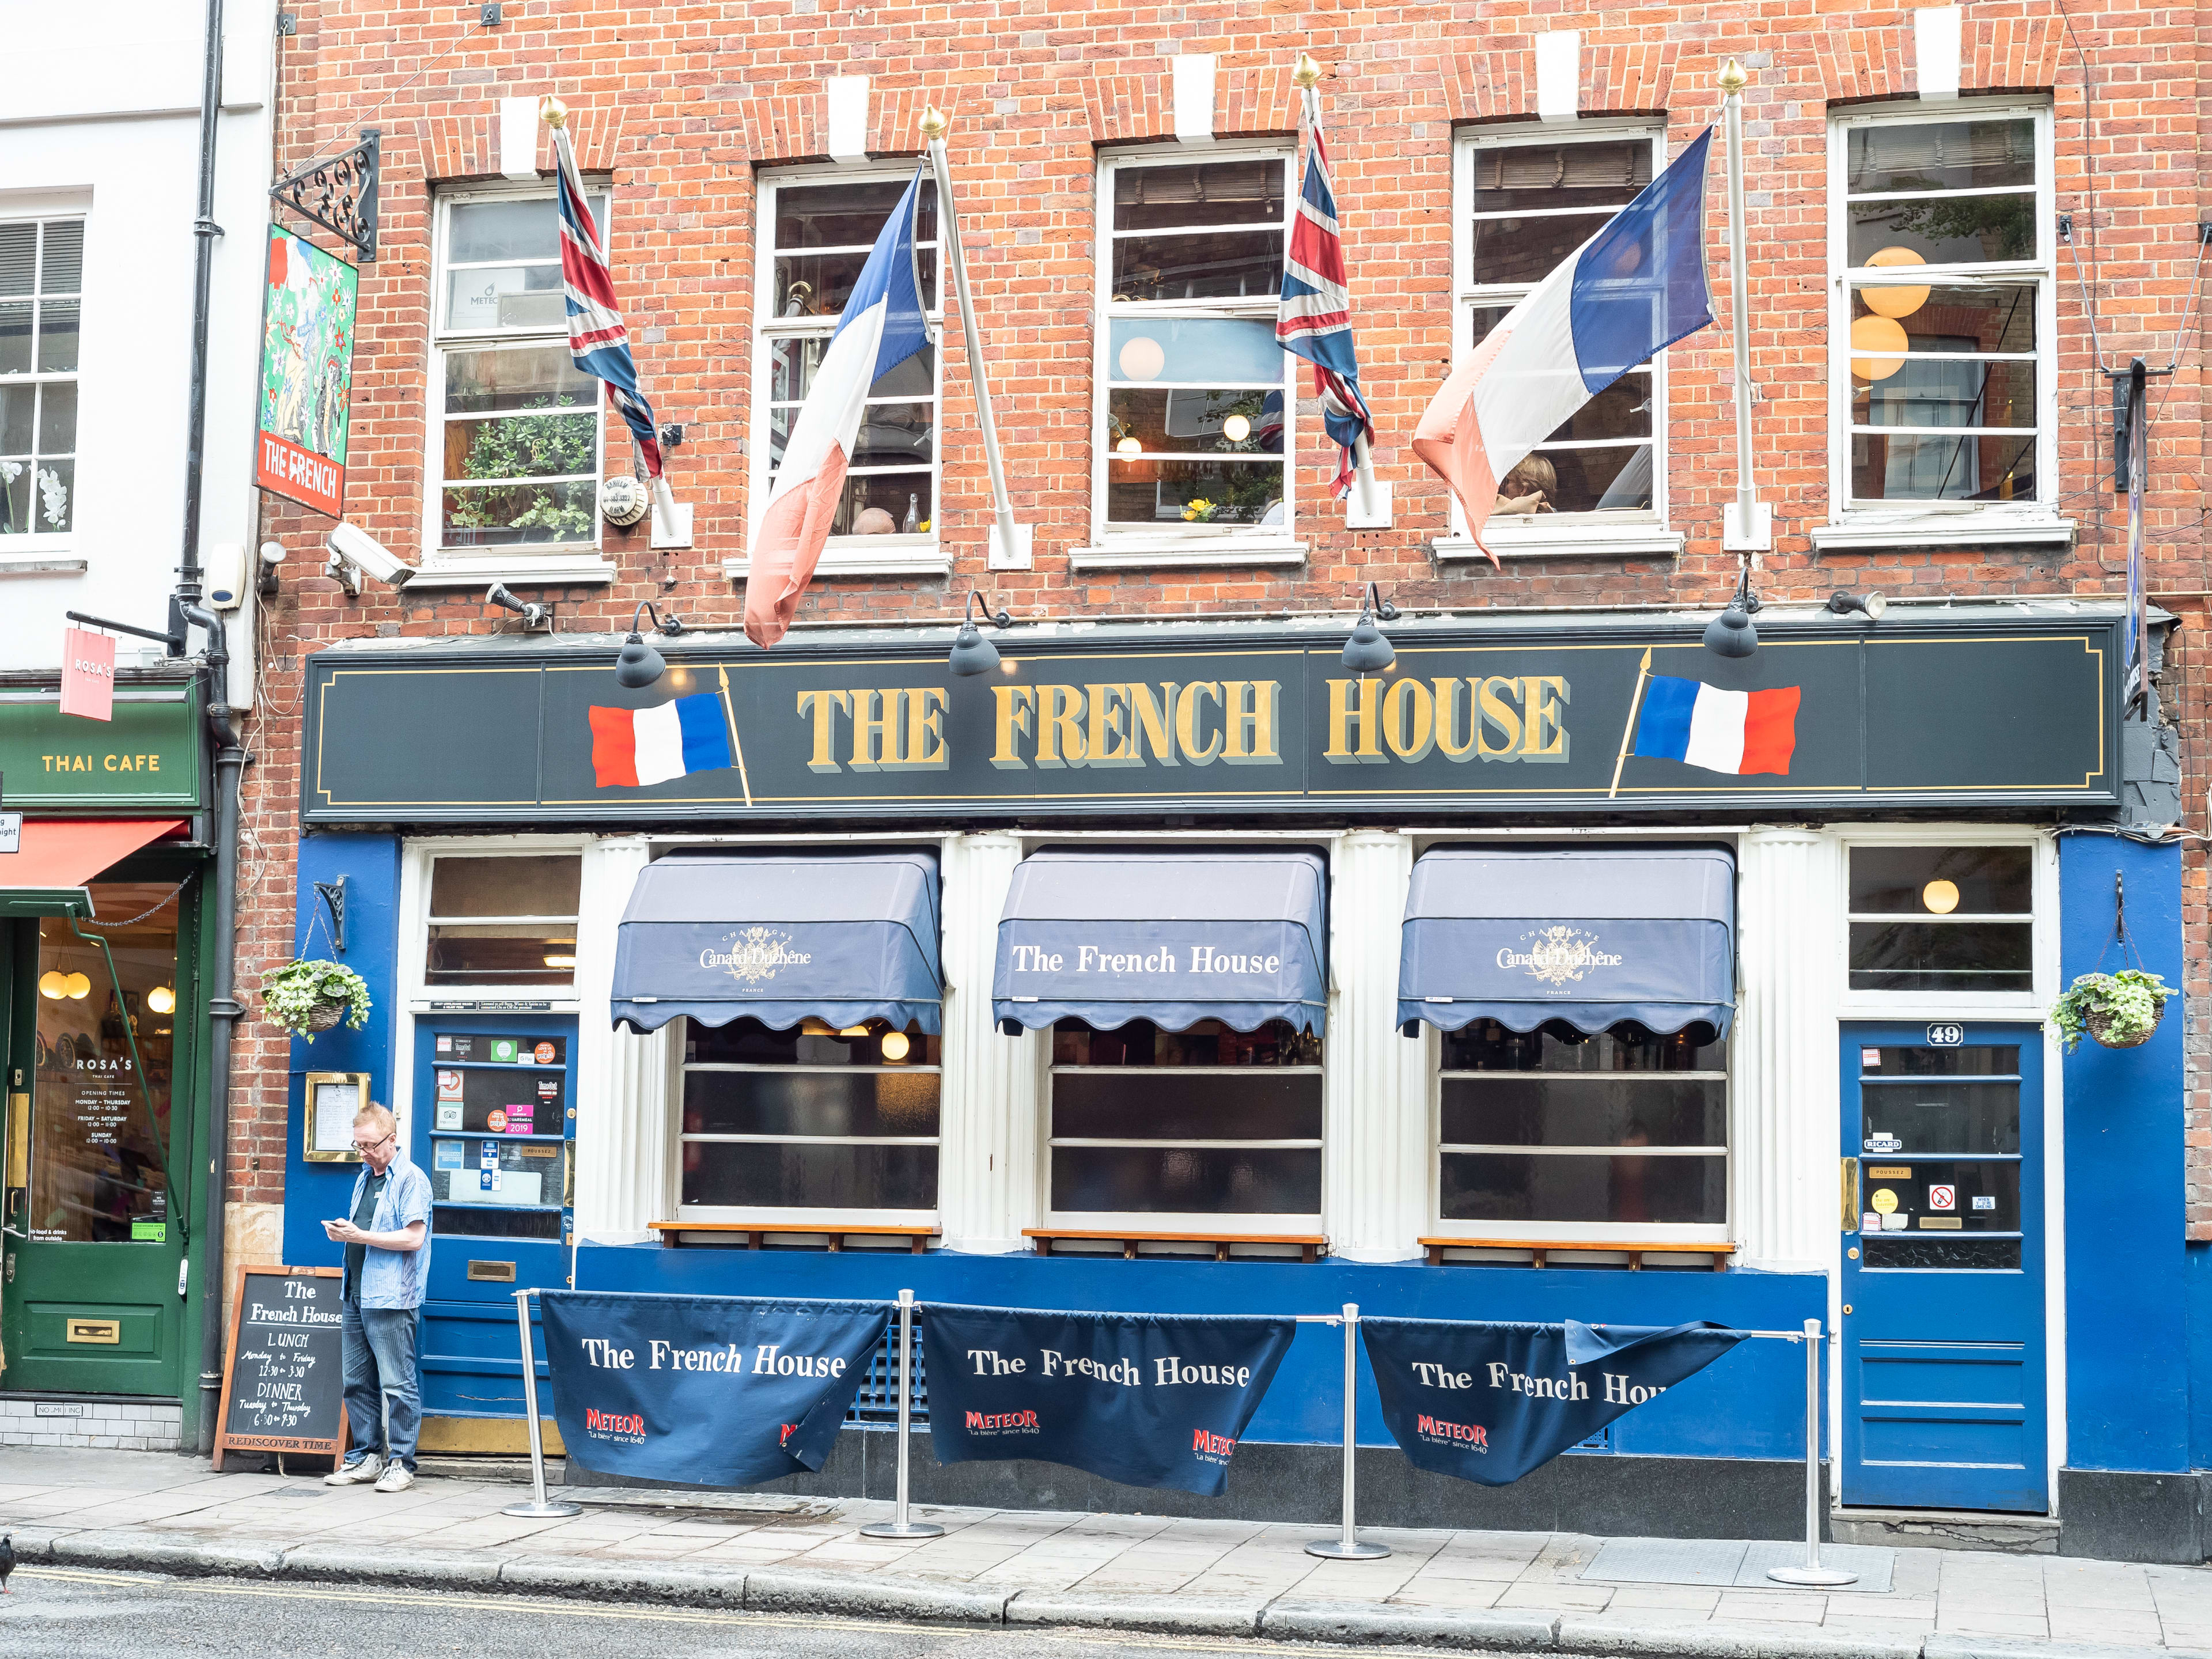 The French House image